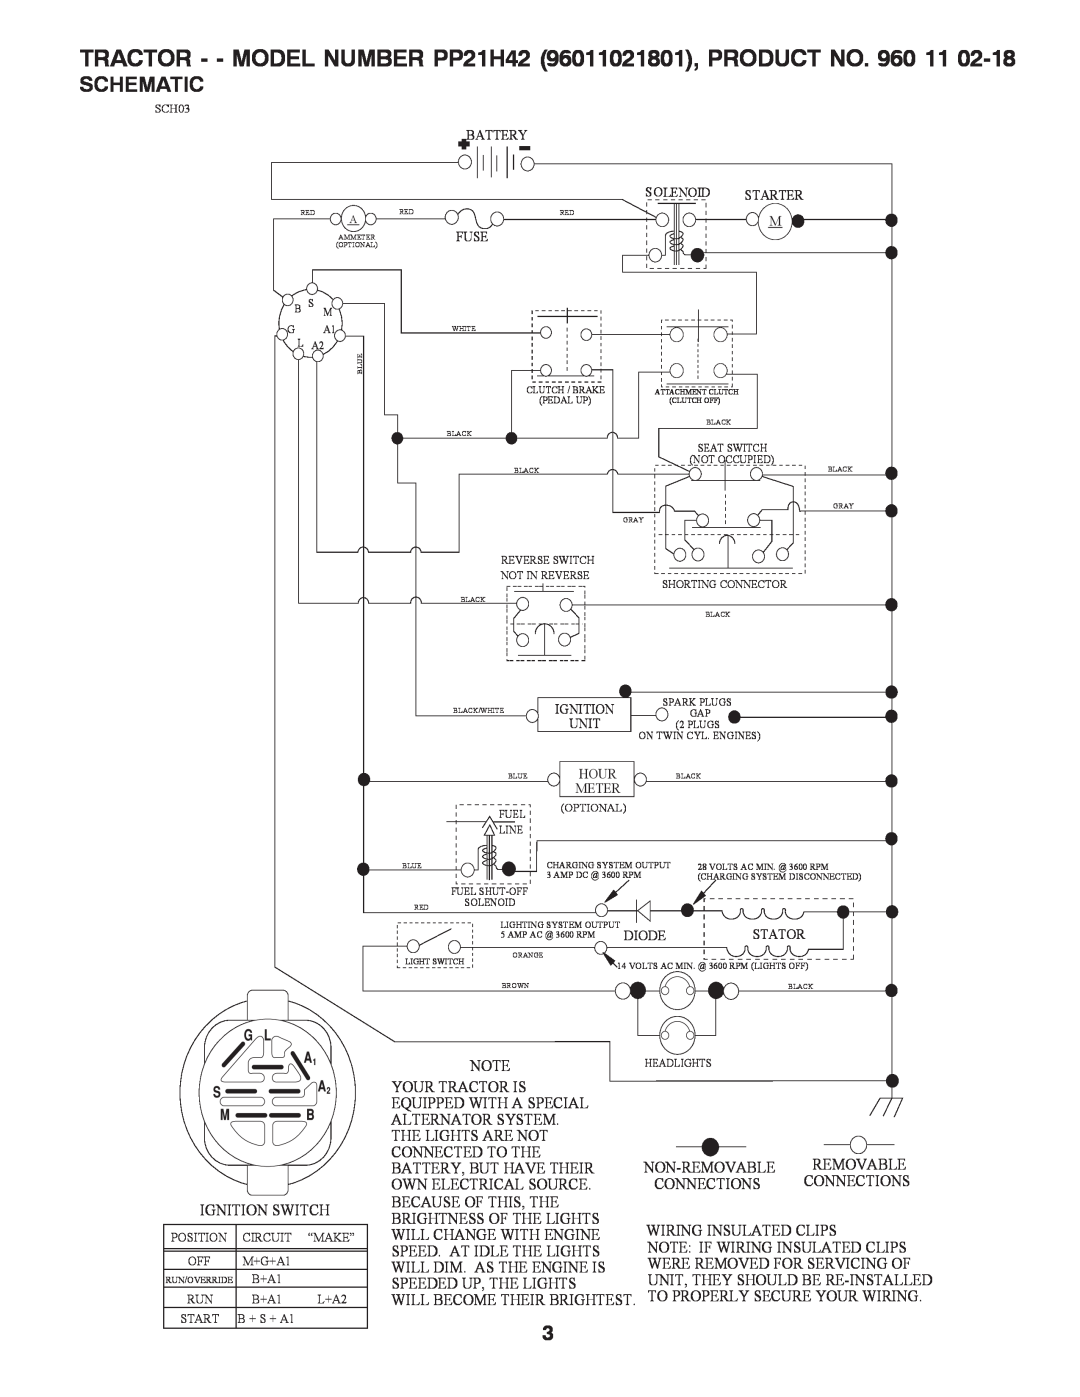 Poulan 532 41 91-64 manual TRACTOR - - MODEL NUMBER PP21H42 96011021801, PRODUCT NO, Schematic, Ignition Switch 